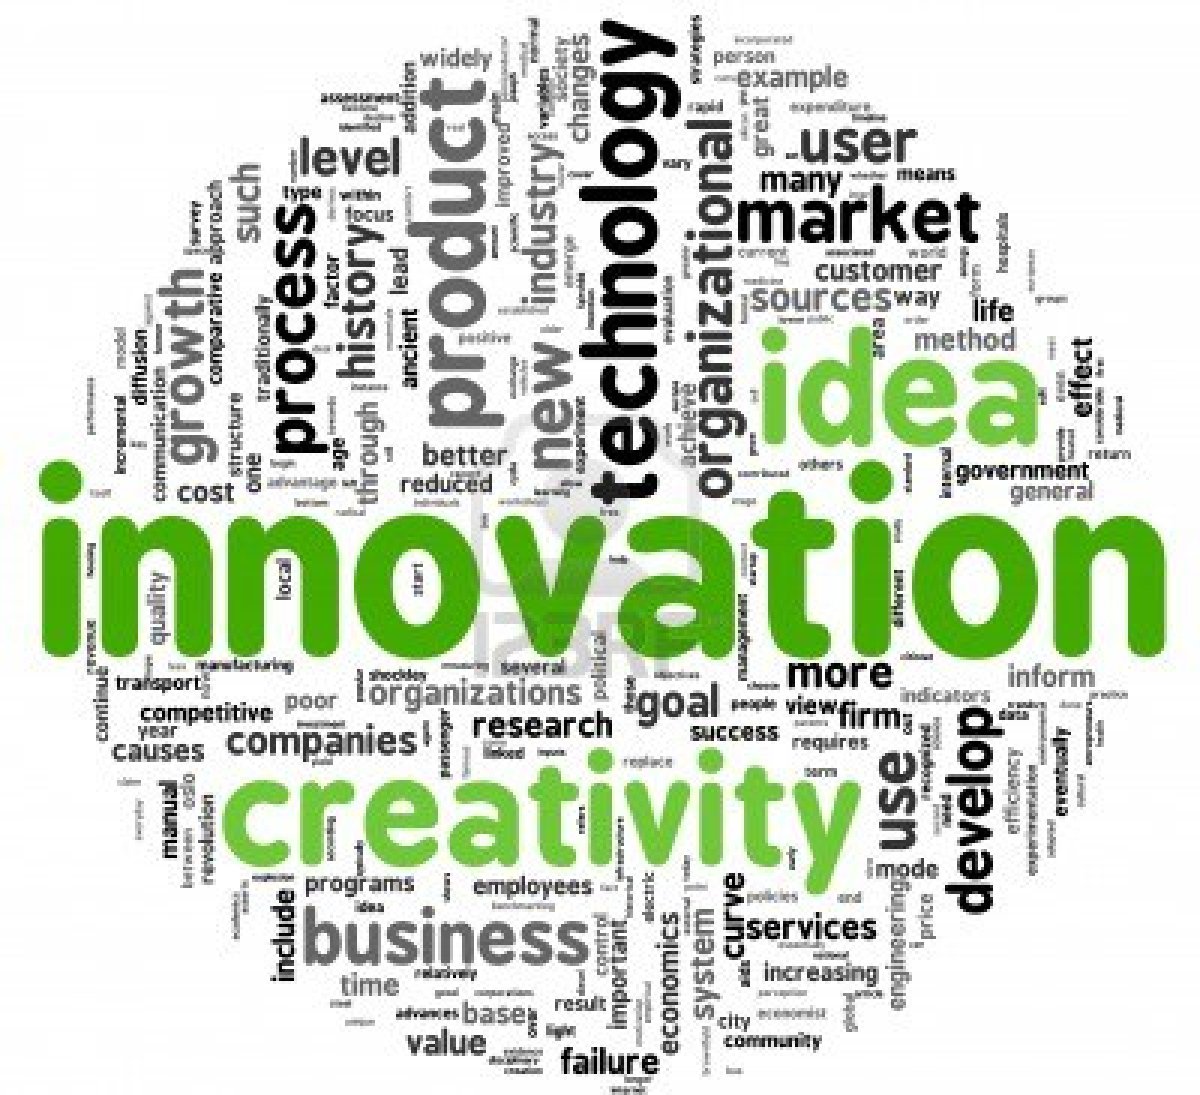 Innovation and change - Insights